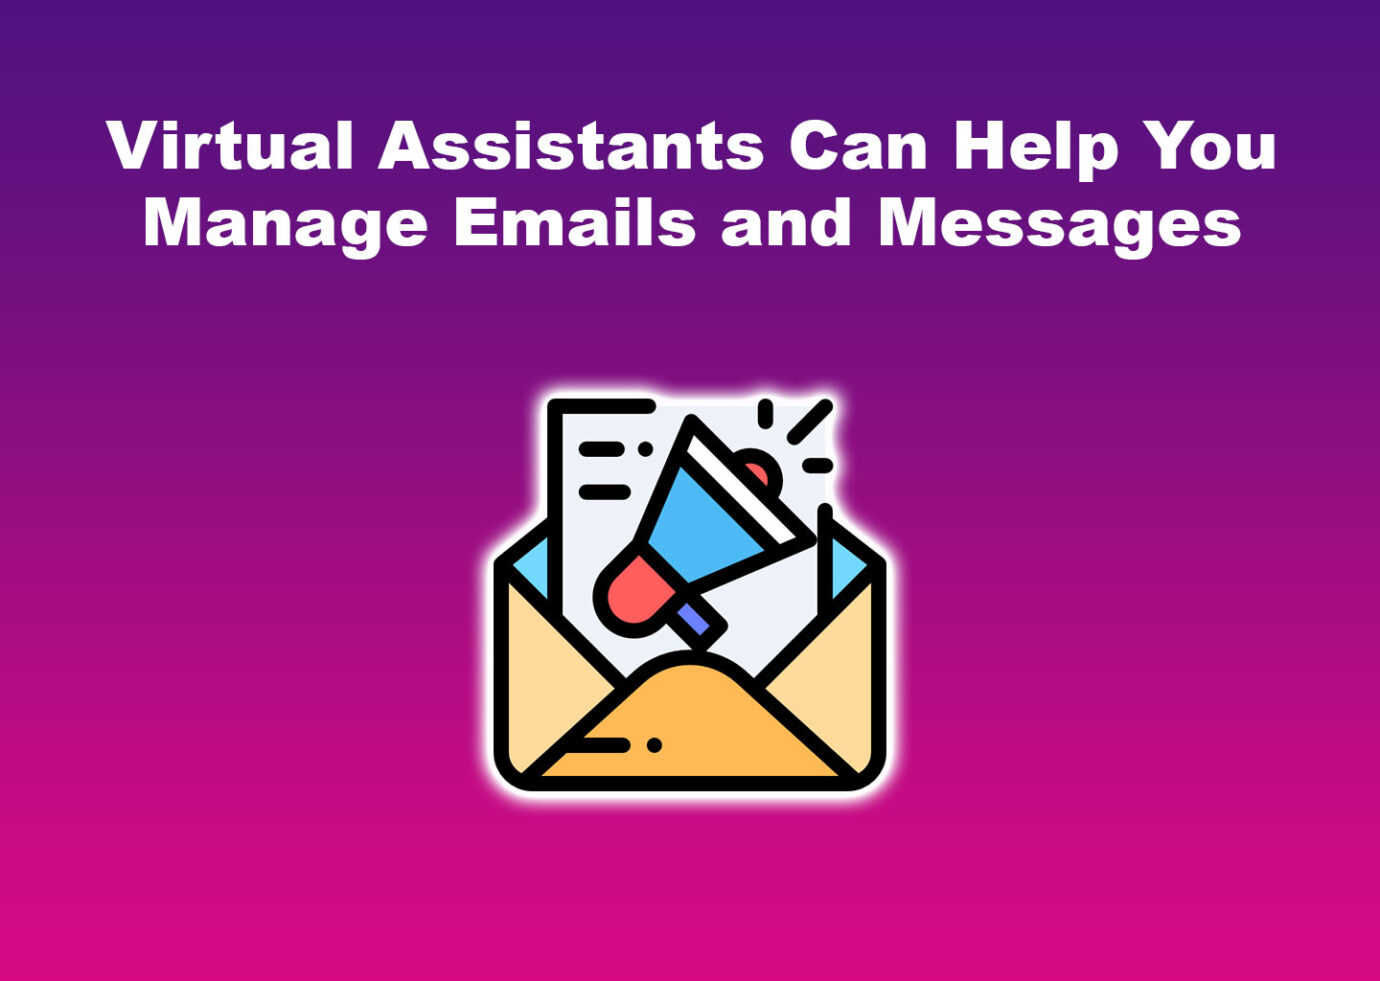 Virtual Assistants Can Help You Manage Emails and Messages